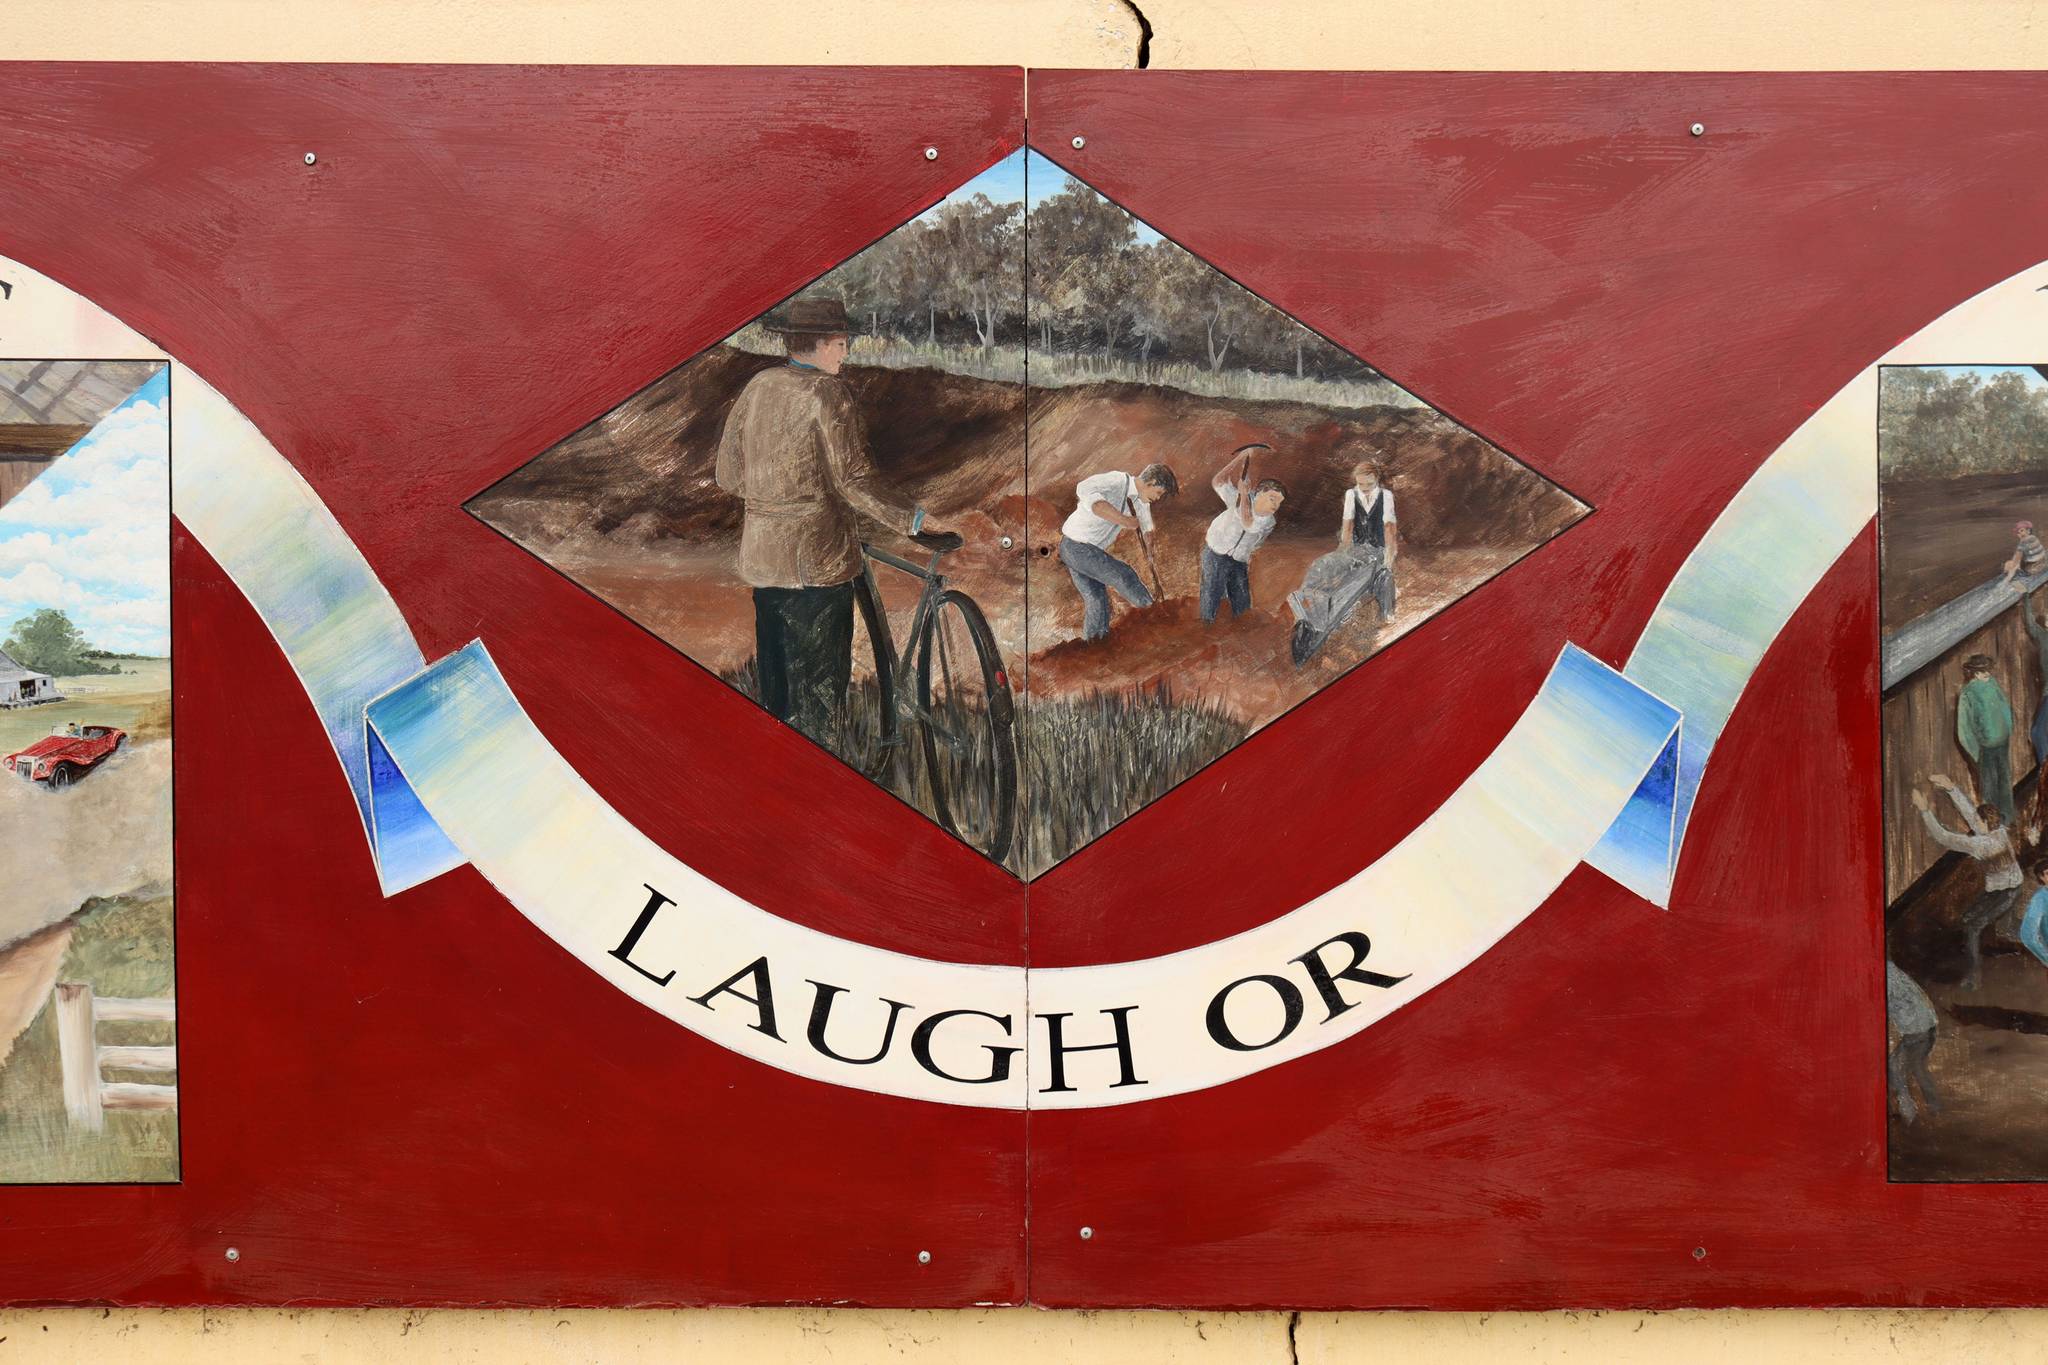 Unknown - Echuca&mdash;Smile, Laugh or Frown